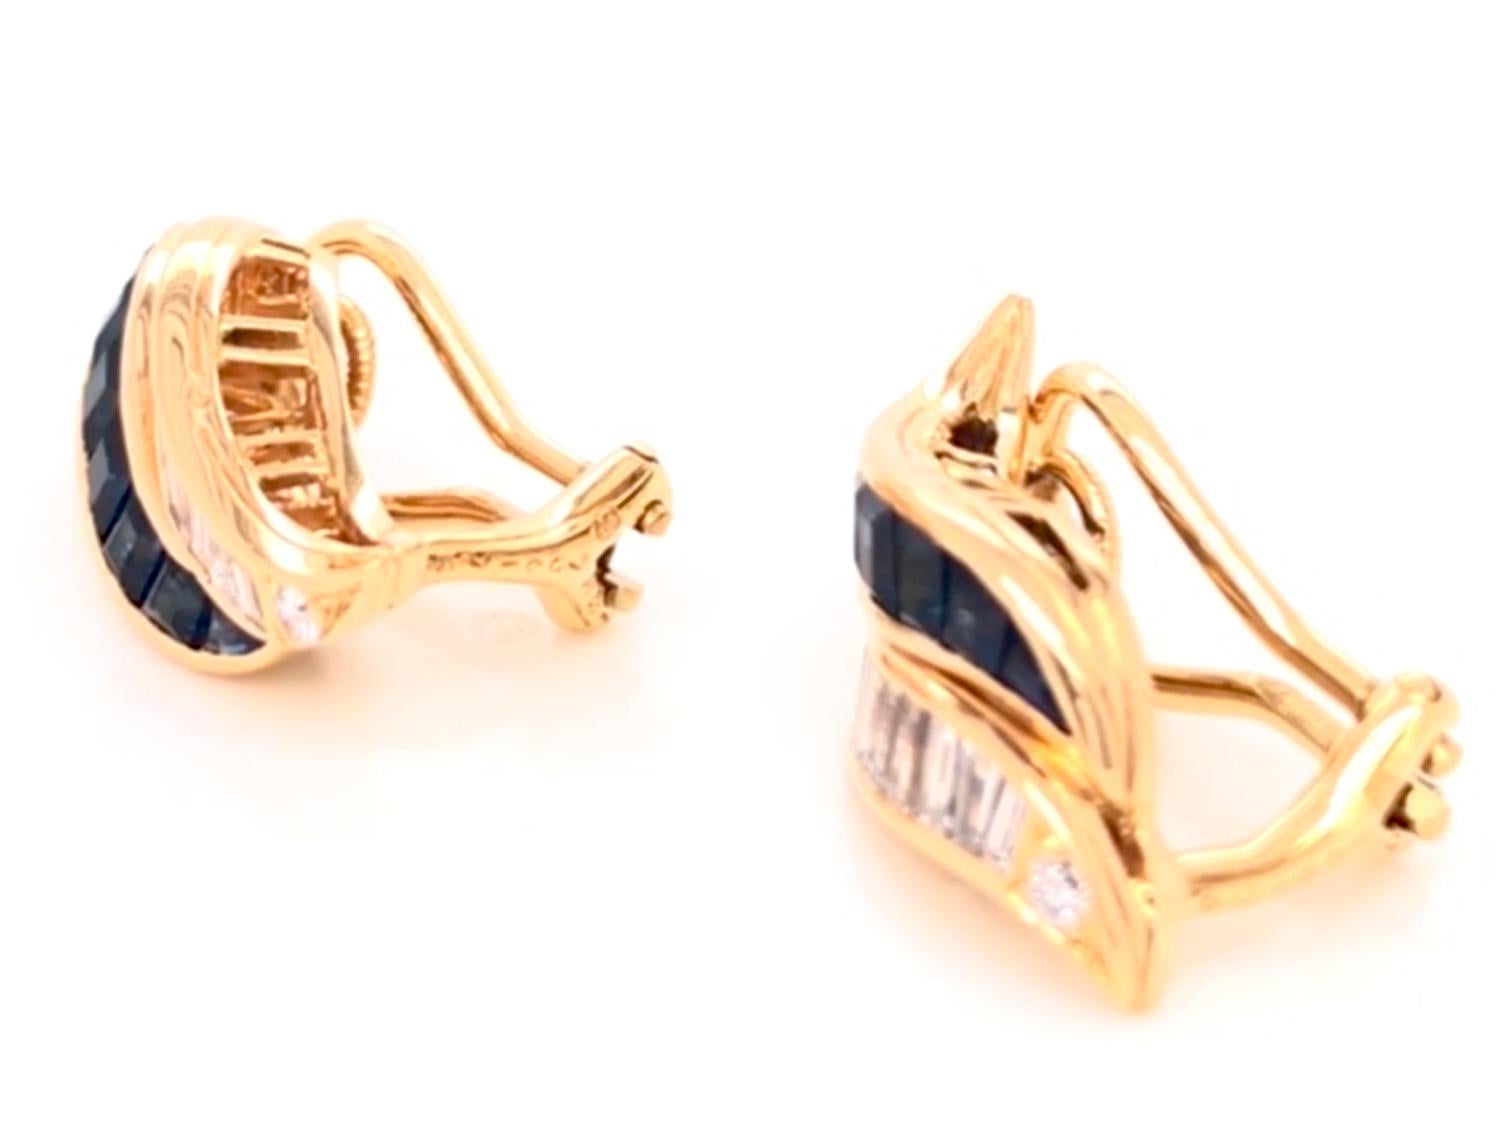 Oscar Heyman 18k yellow gold earrings contain 4 Round Diamonds 0.09cts, 20 Baguette Diamonds 1.01cts, and 16 Square Sapphires 2.00cts. It is stamped with the makers mark, 18K, and serial number 706174.

Earrings have clip backs and a post can be